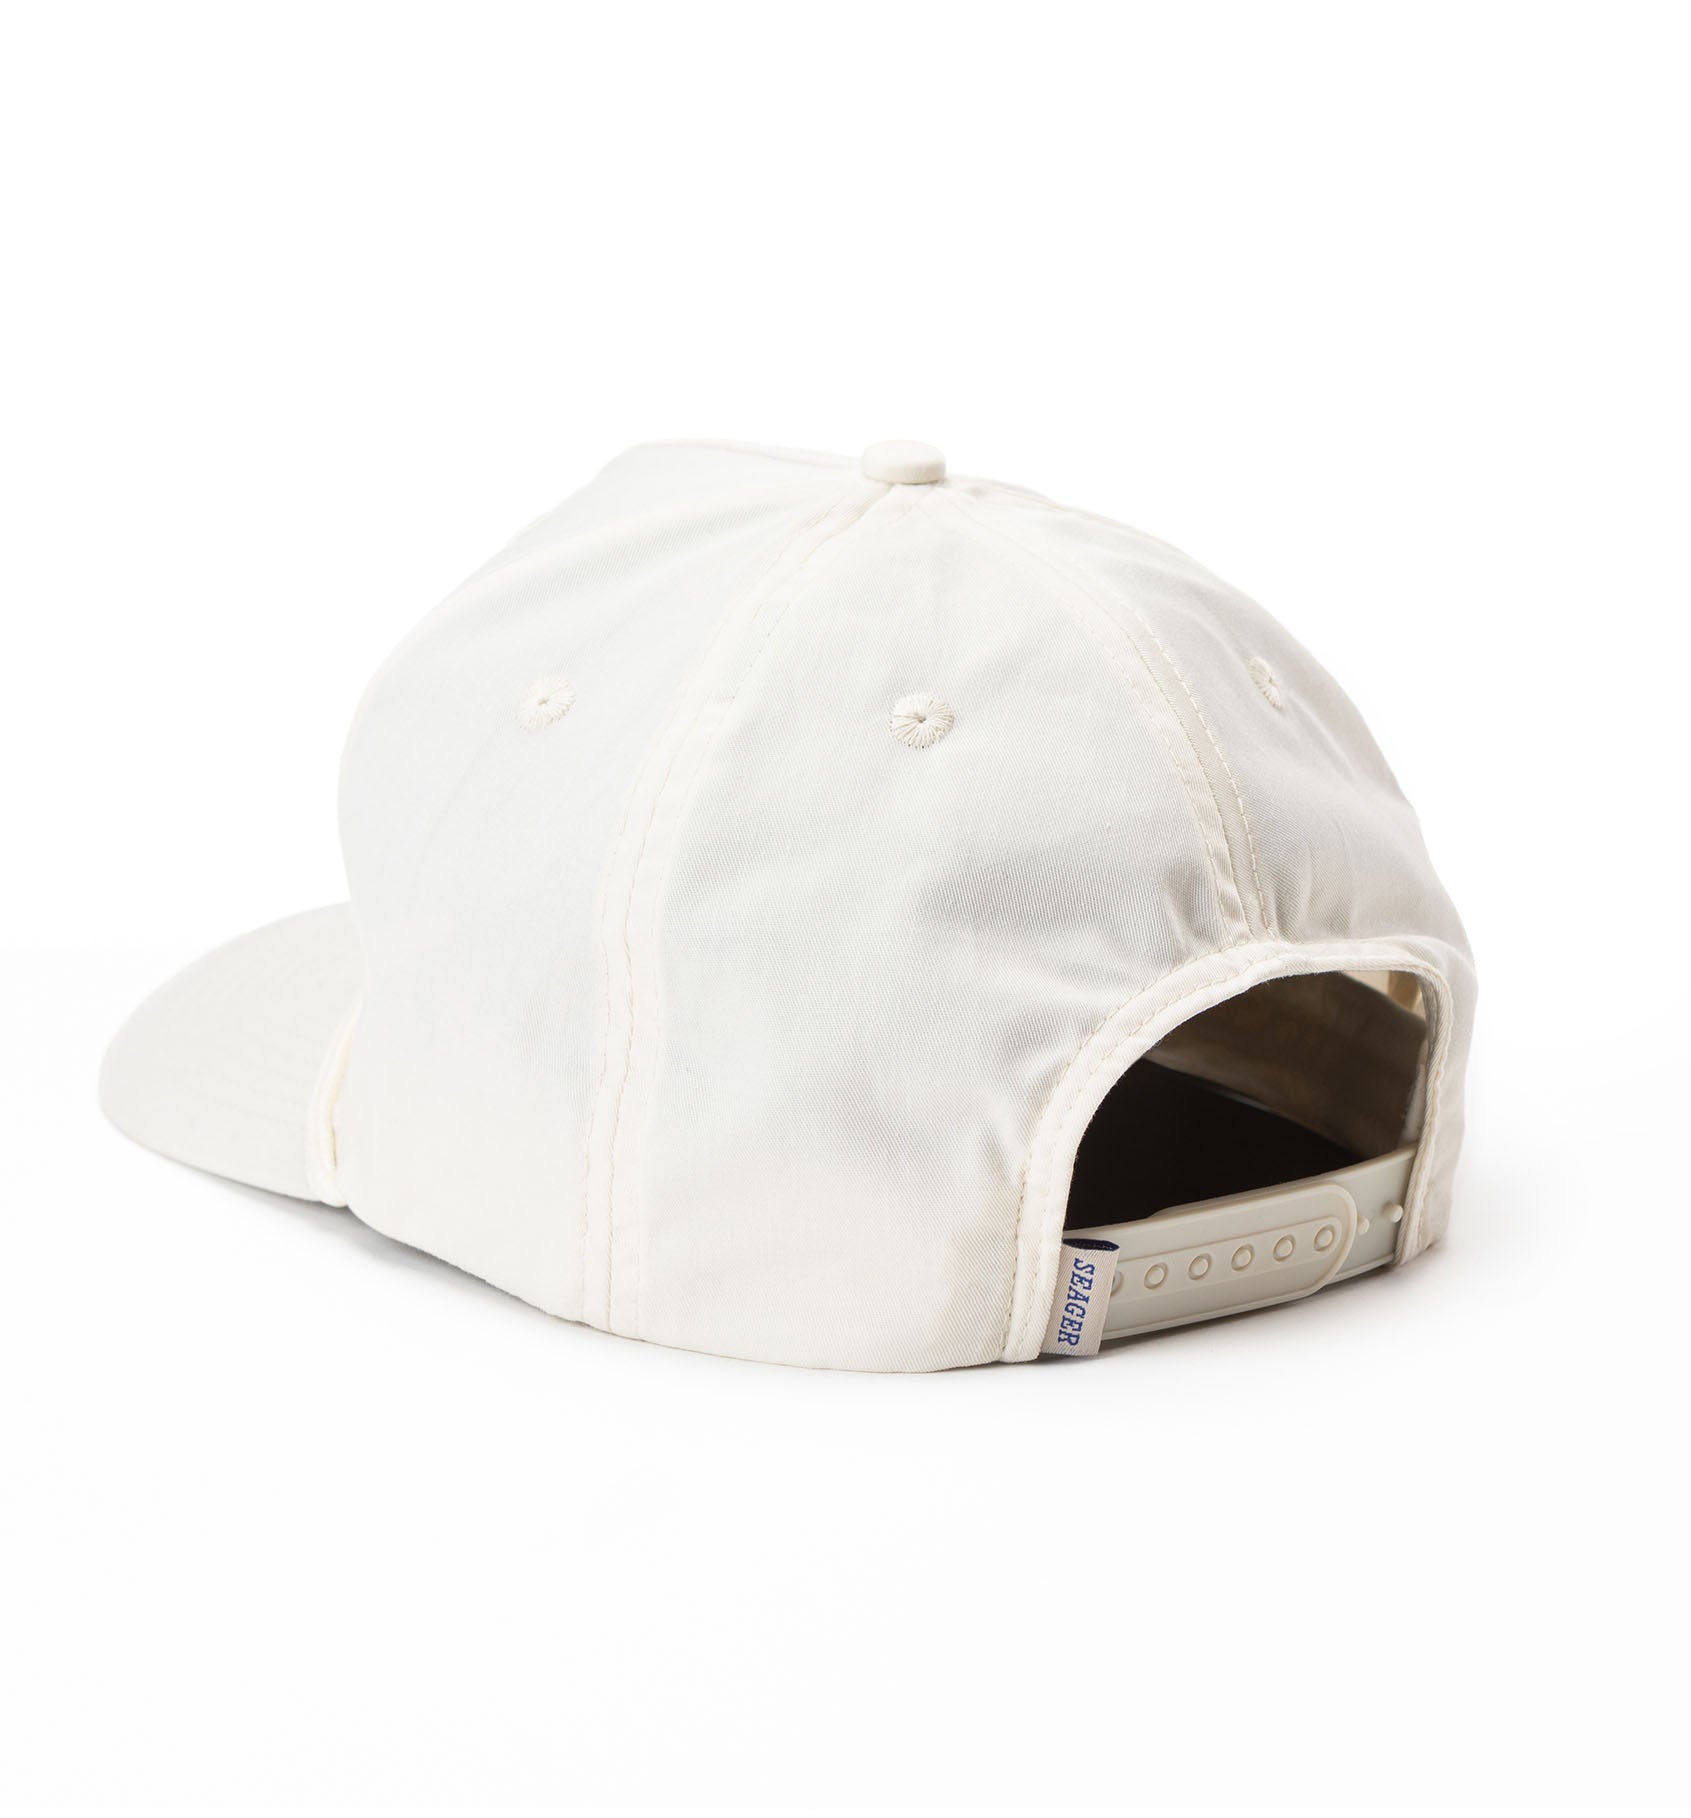 Seager x Waylon Jennings Country Snapback White | Seager Co.